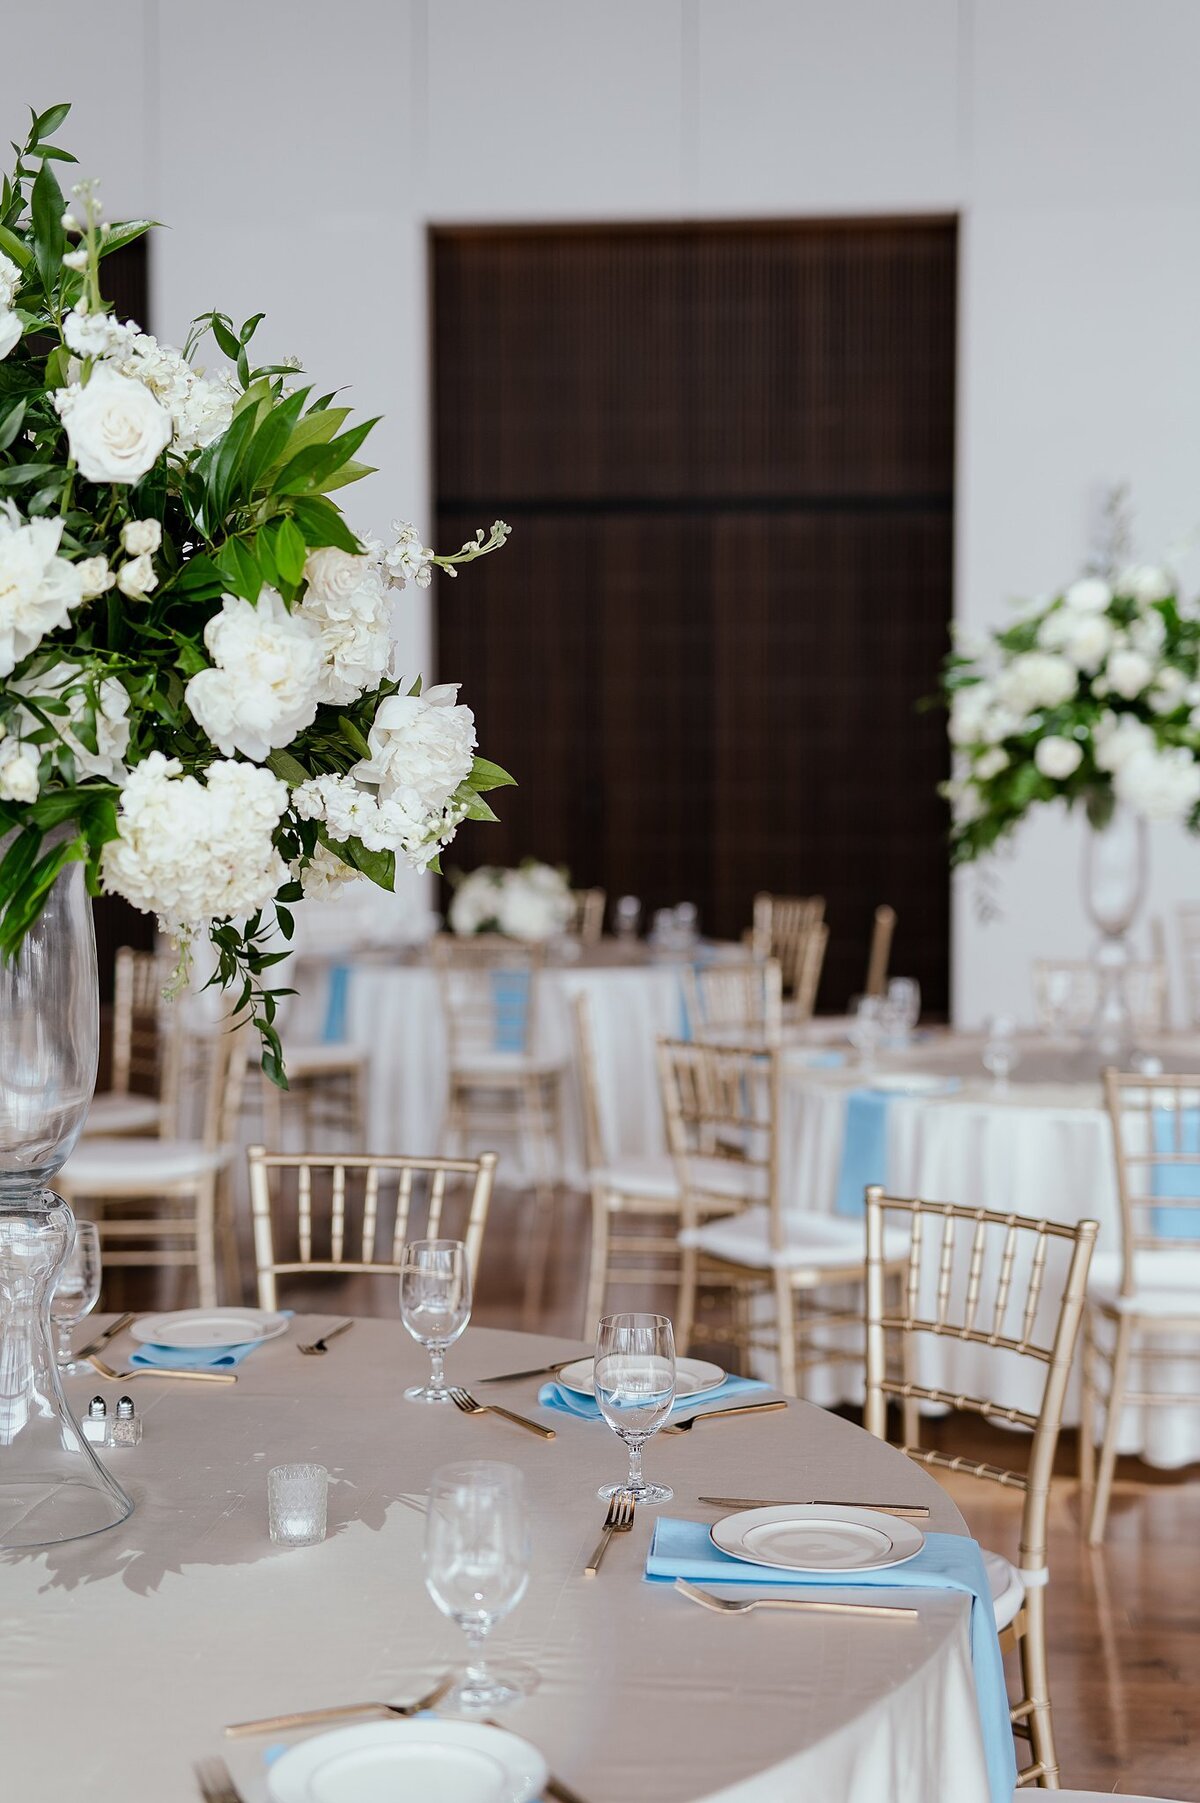 Elegant ivory, blue and gold tables set for a wedding reception at the Country Music Hall of Fame with tall glass vases topped with lush white flowers, greenery and hydrangeas.